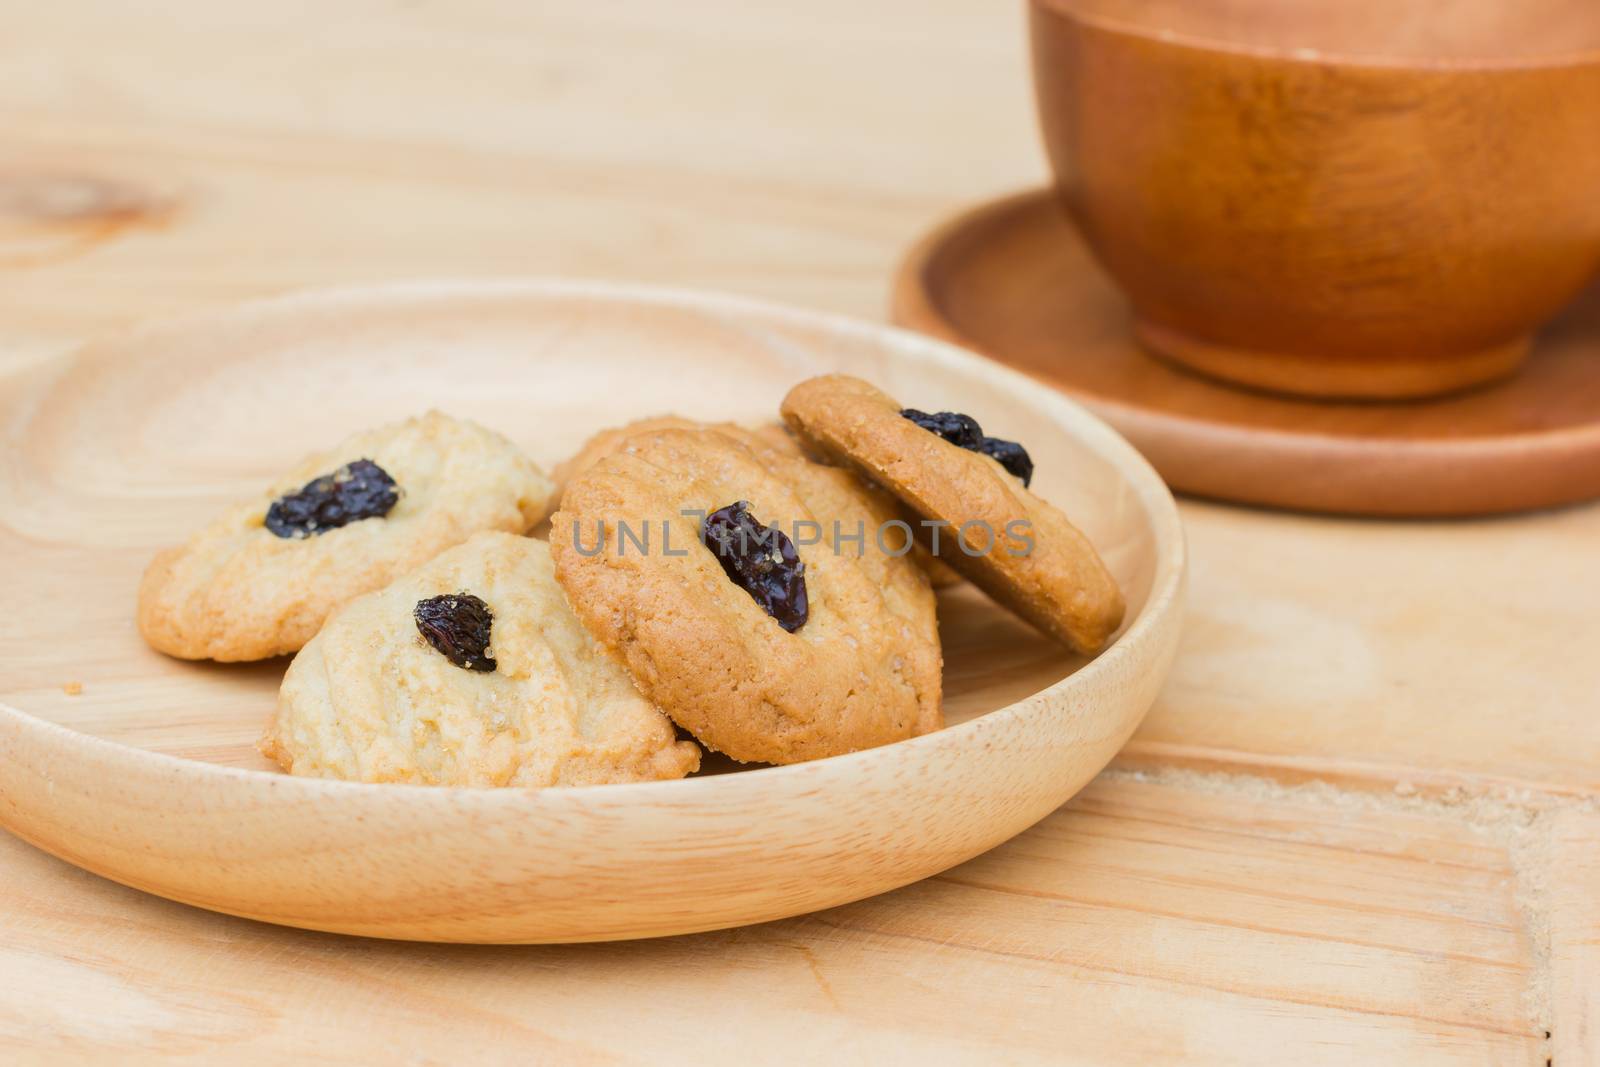 Fresh baked butter cookies with raisins on wooden background by tidarattj